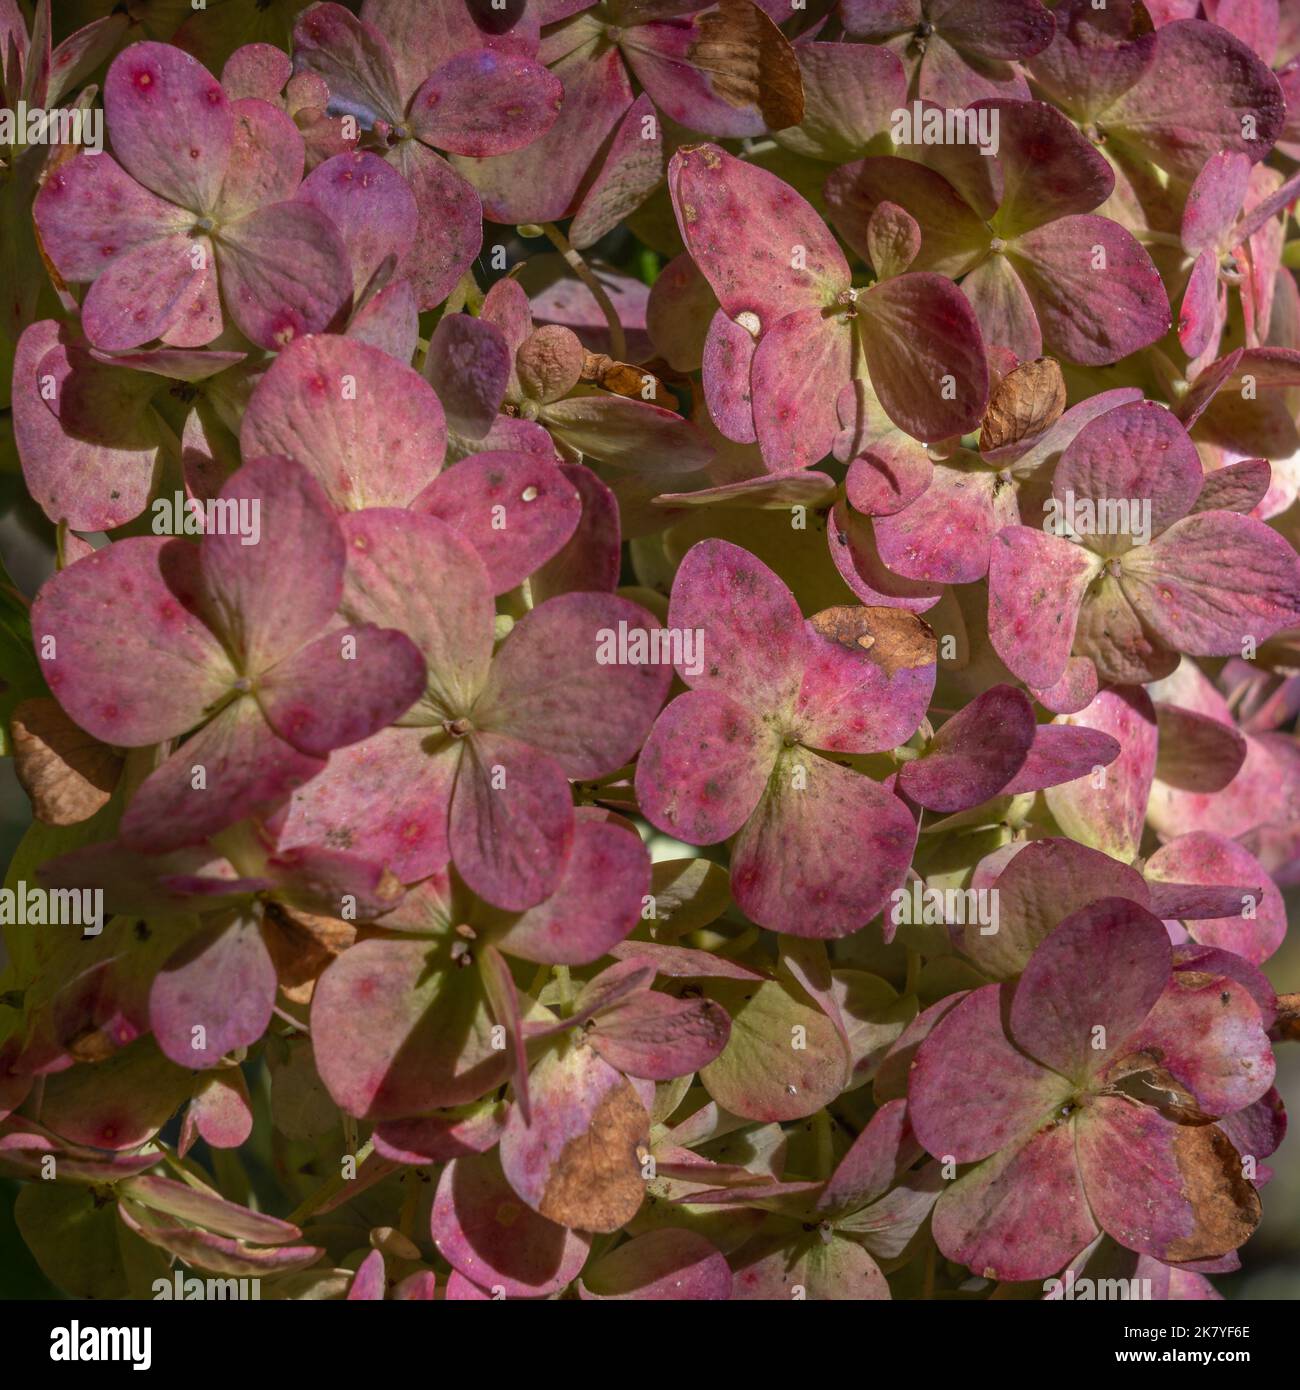 Detail pastel color closeup view of beautiful wilting hydrangea macrophylla pink flowers in natural outdoor setting Stock Photo